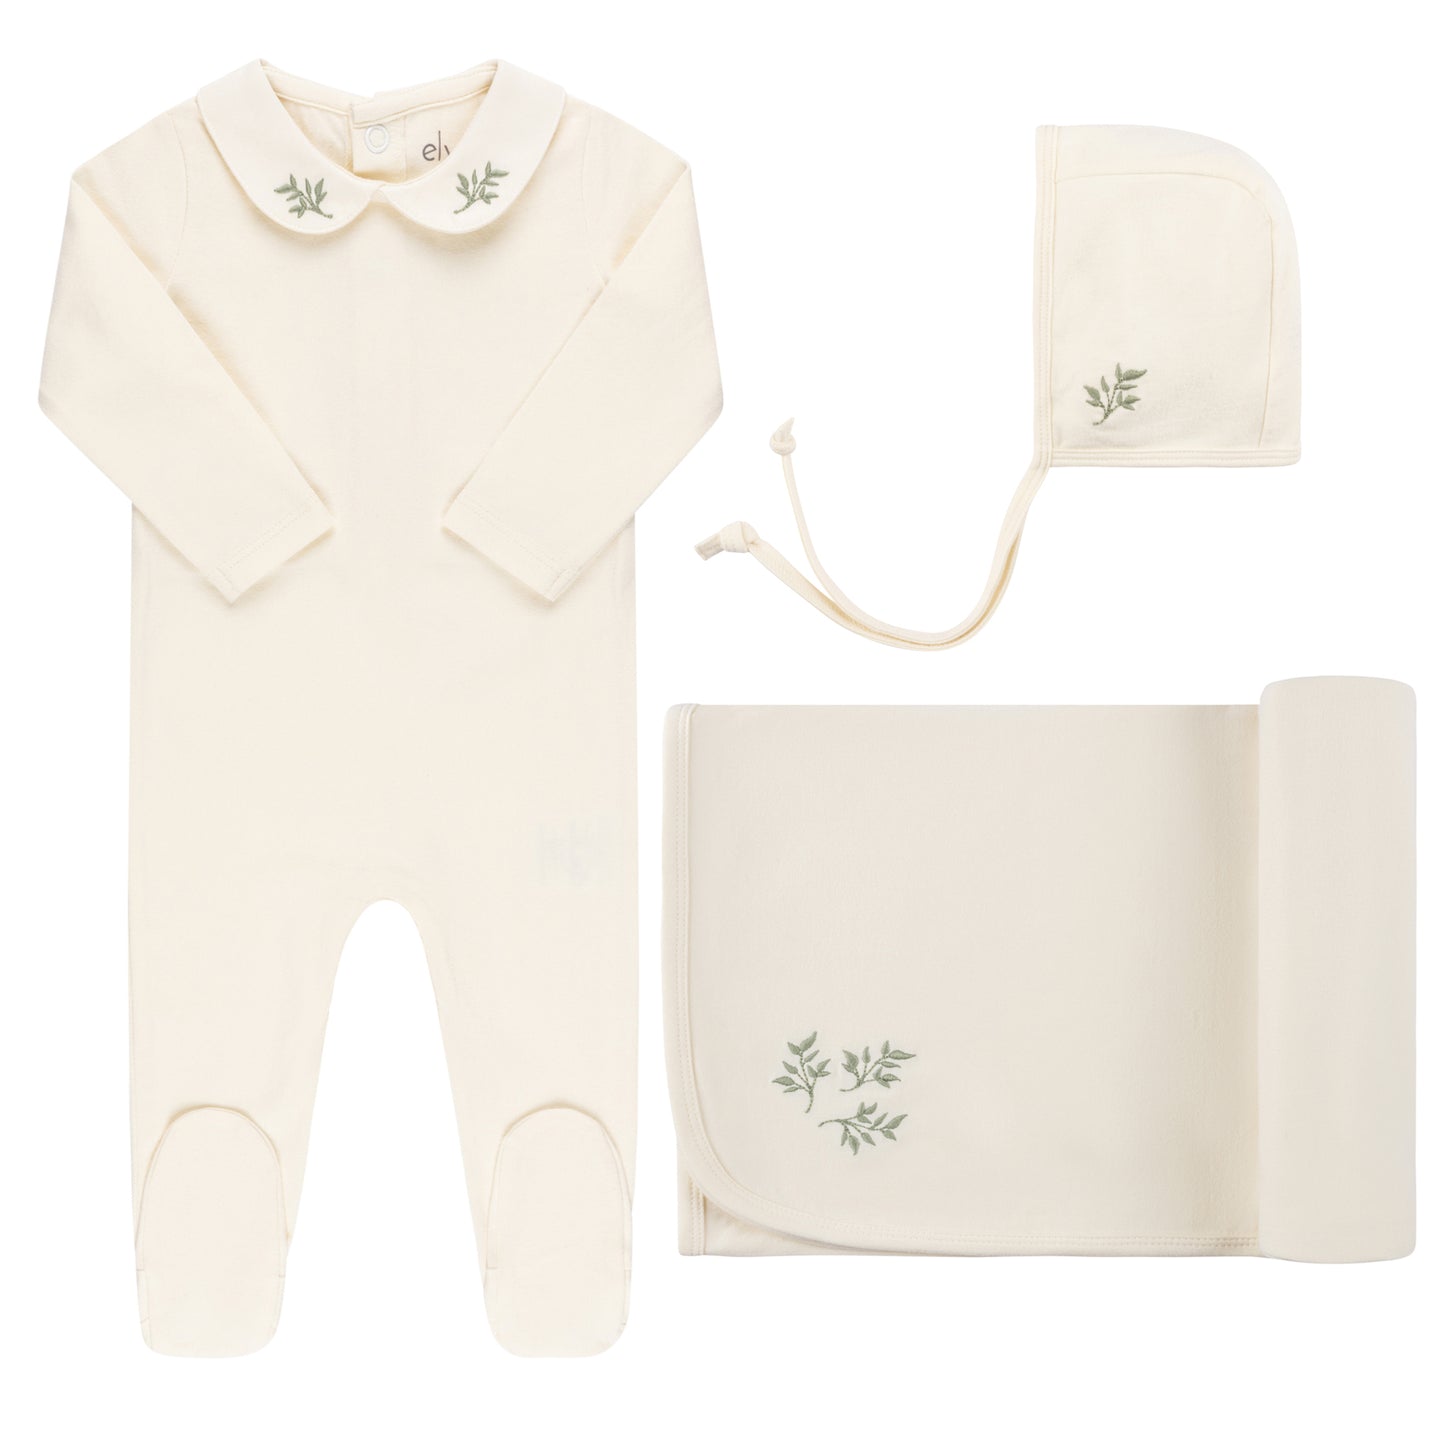 Ely's & Co. Jersey Cotton Embroidered Collar Layette Set